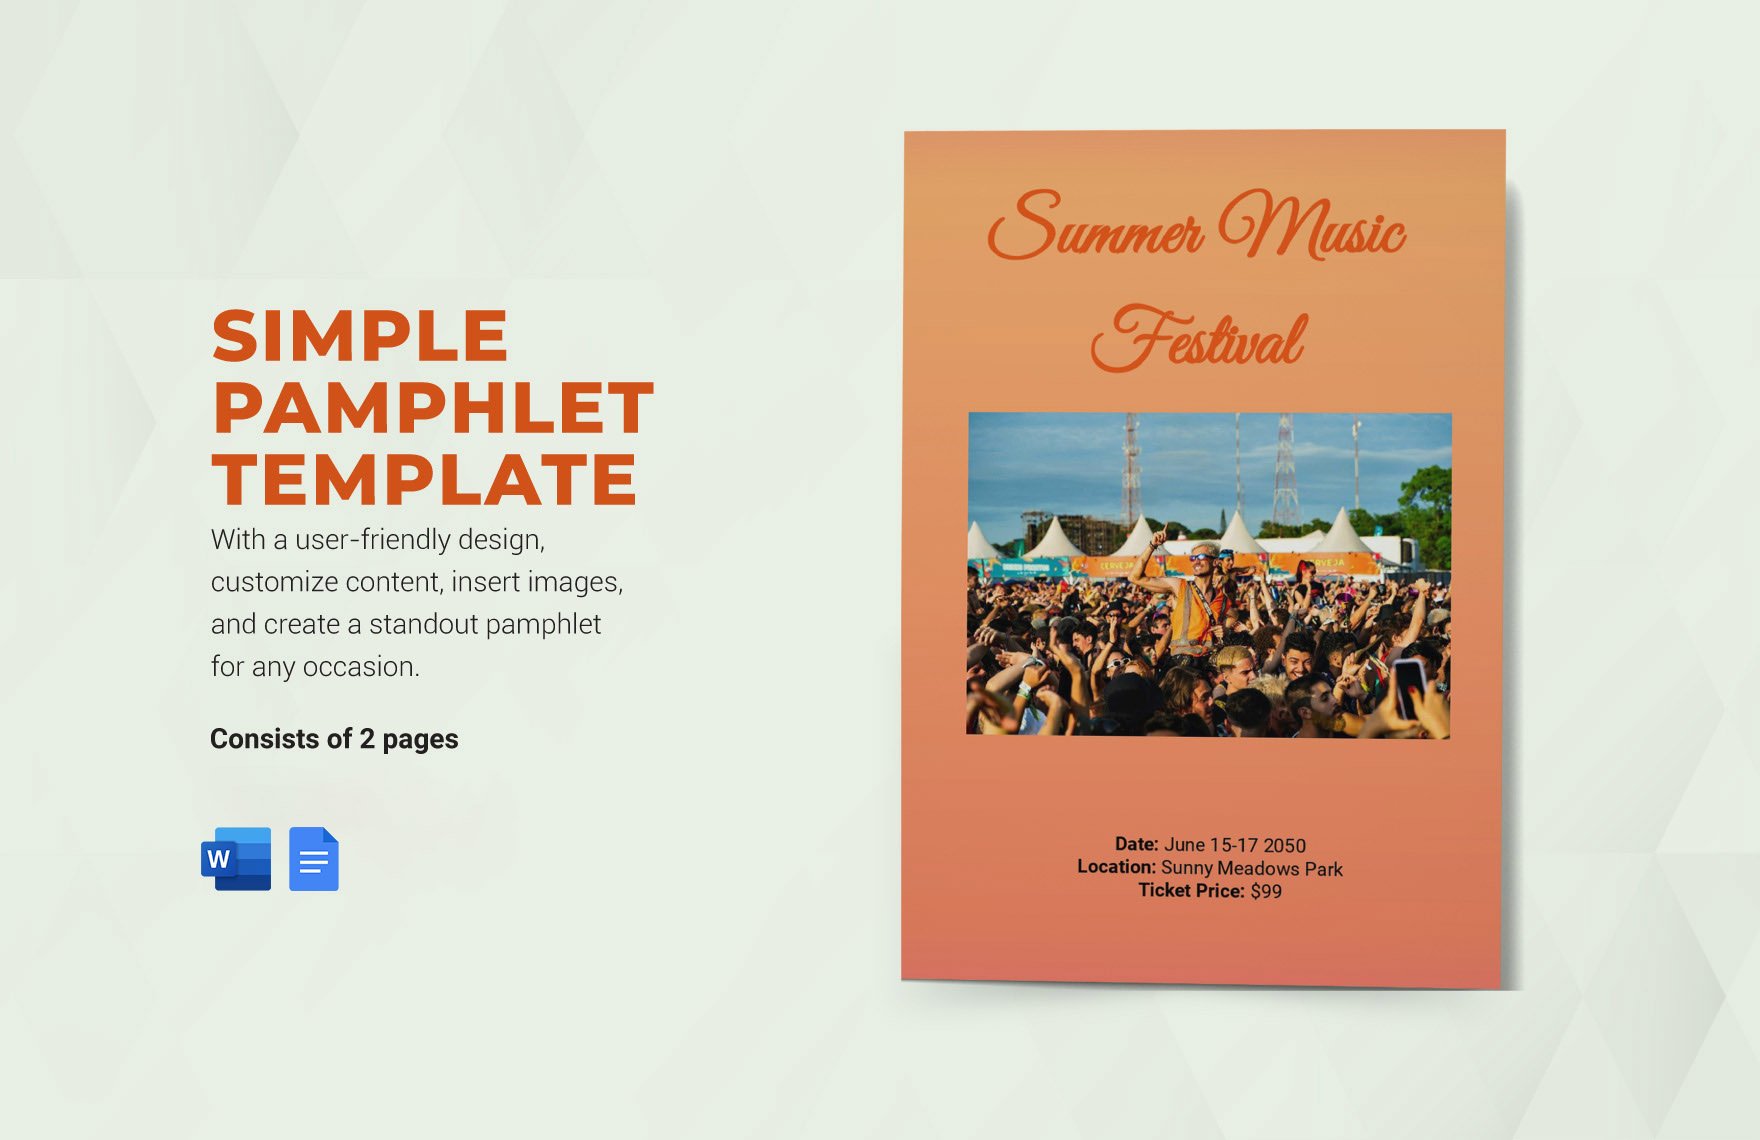 Simple Pamphlet Template